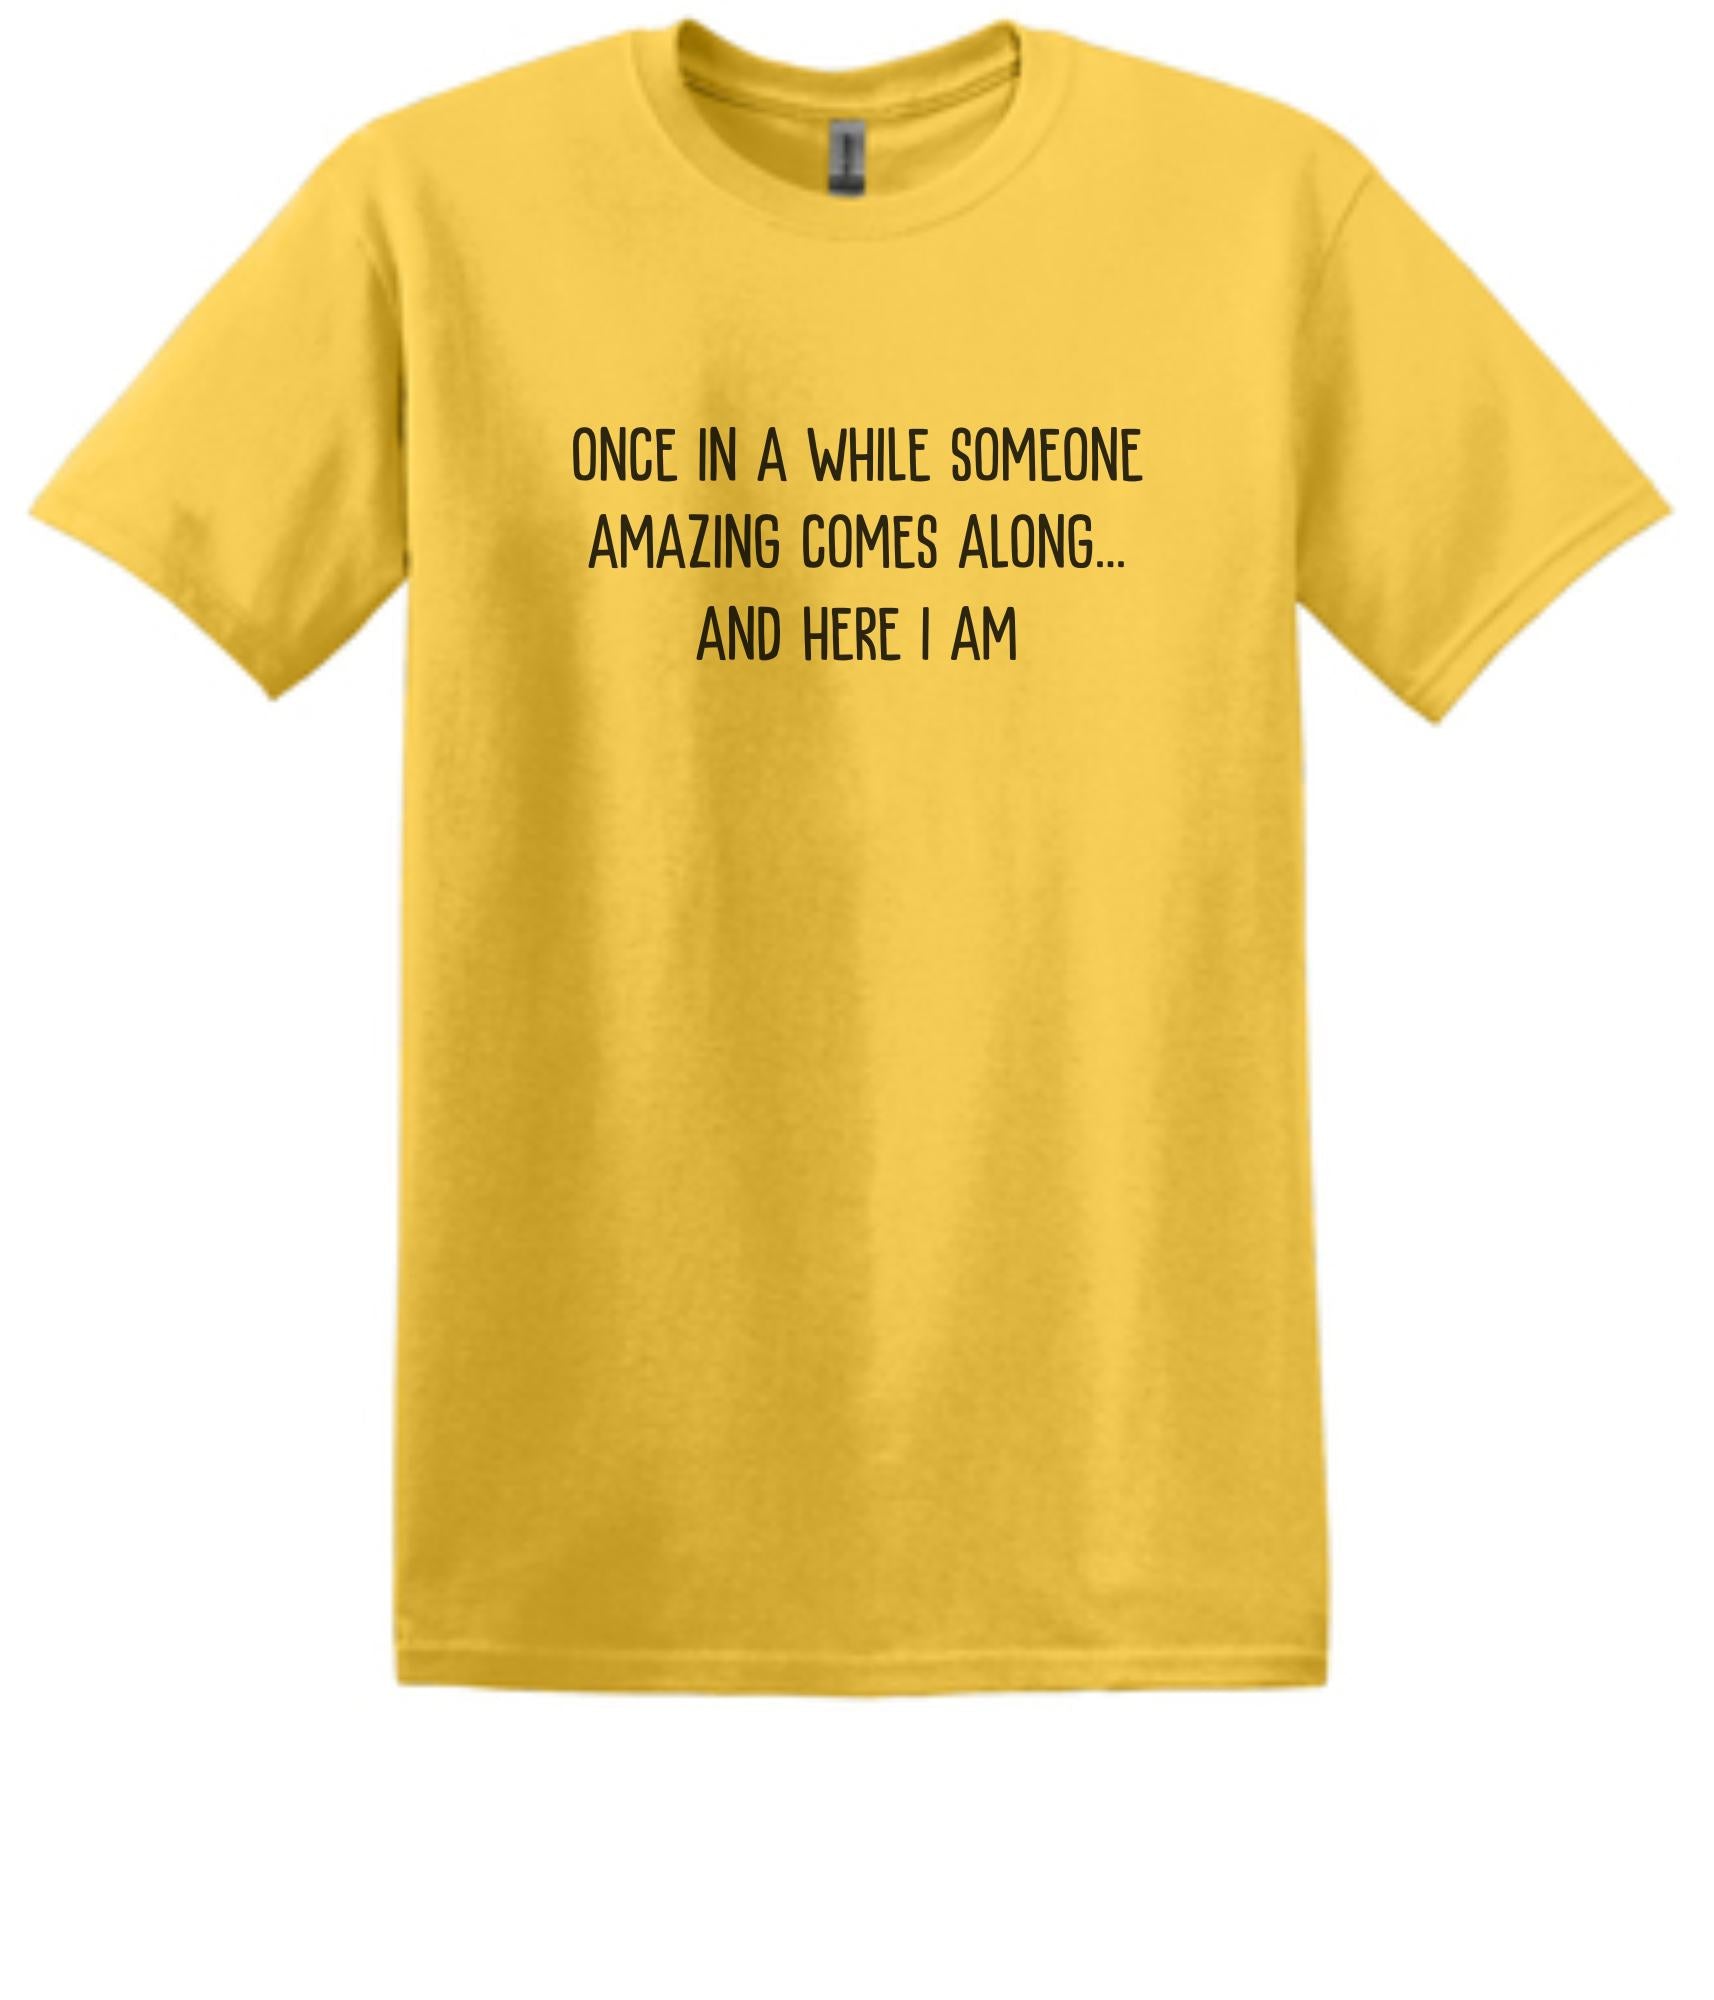 Someone Amazing Comes Along & Here I am Funny T-Shirt